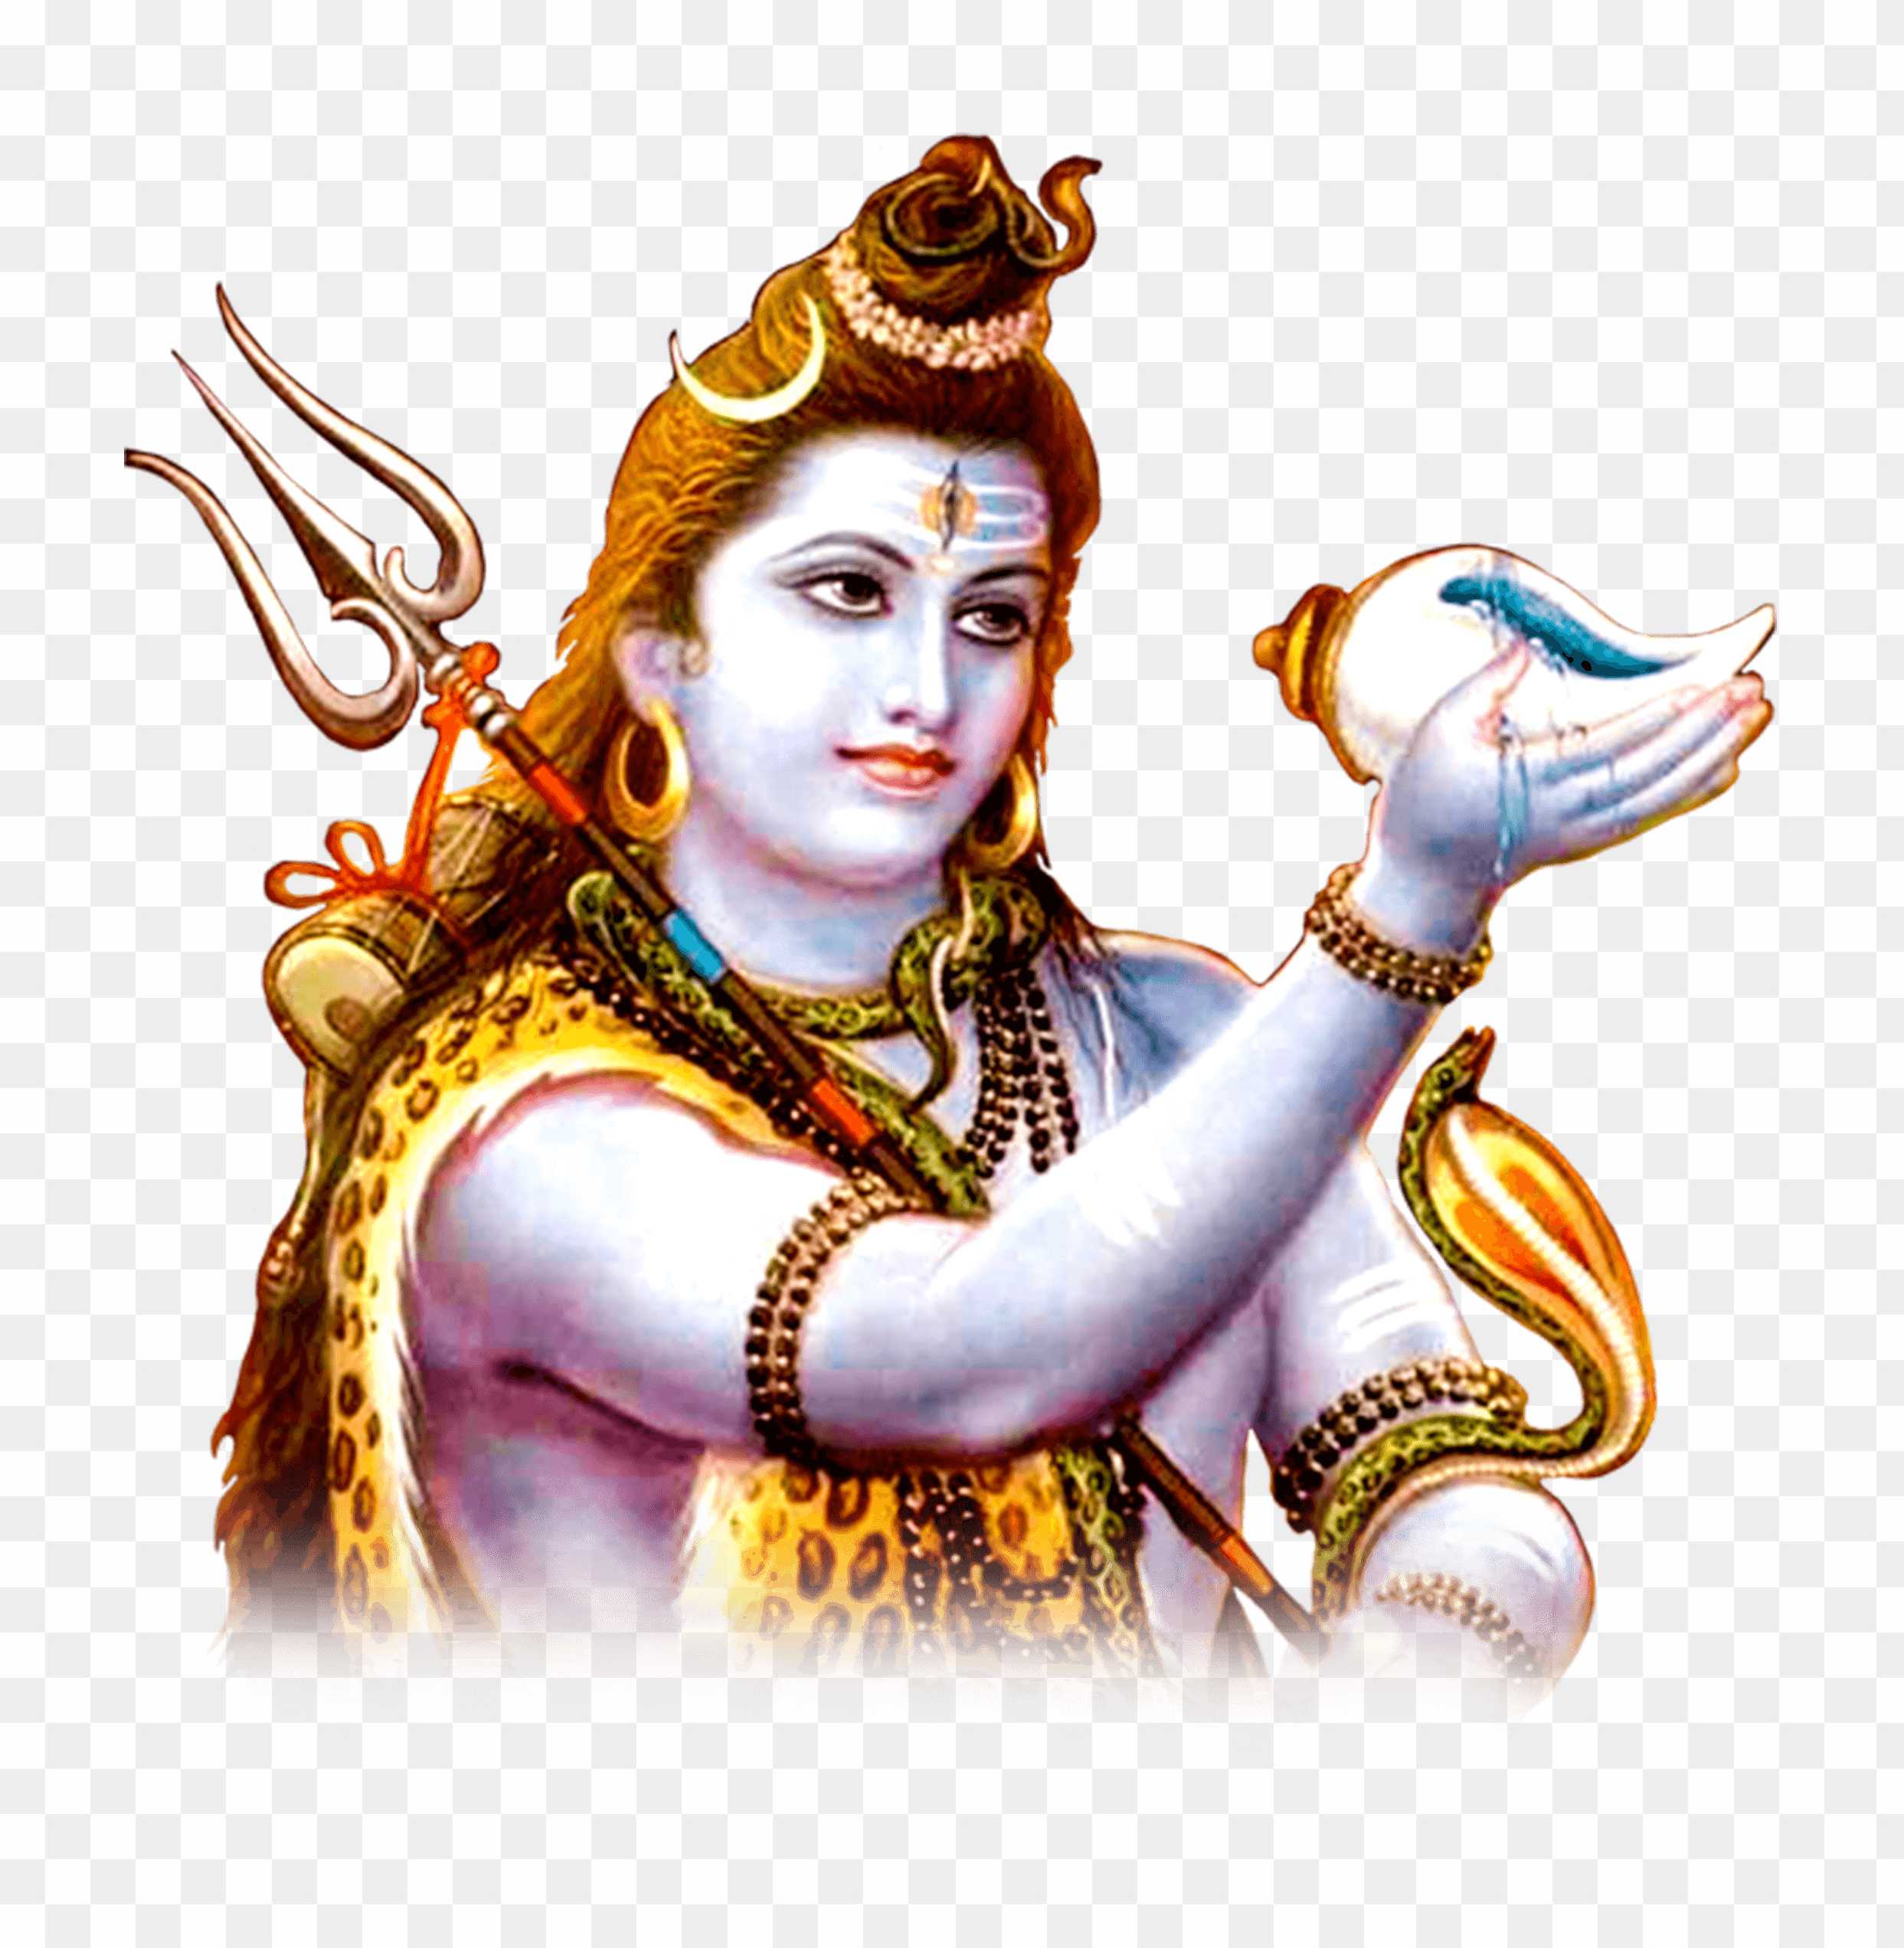 Lord Shiva PNG hd png images download free 